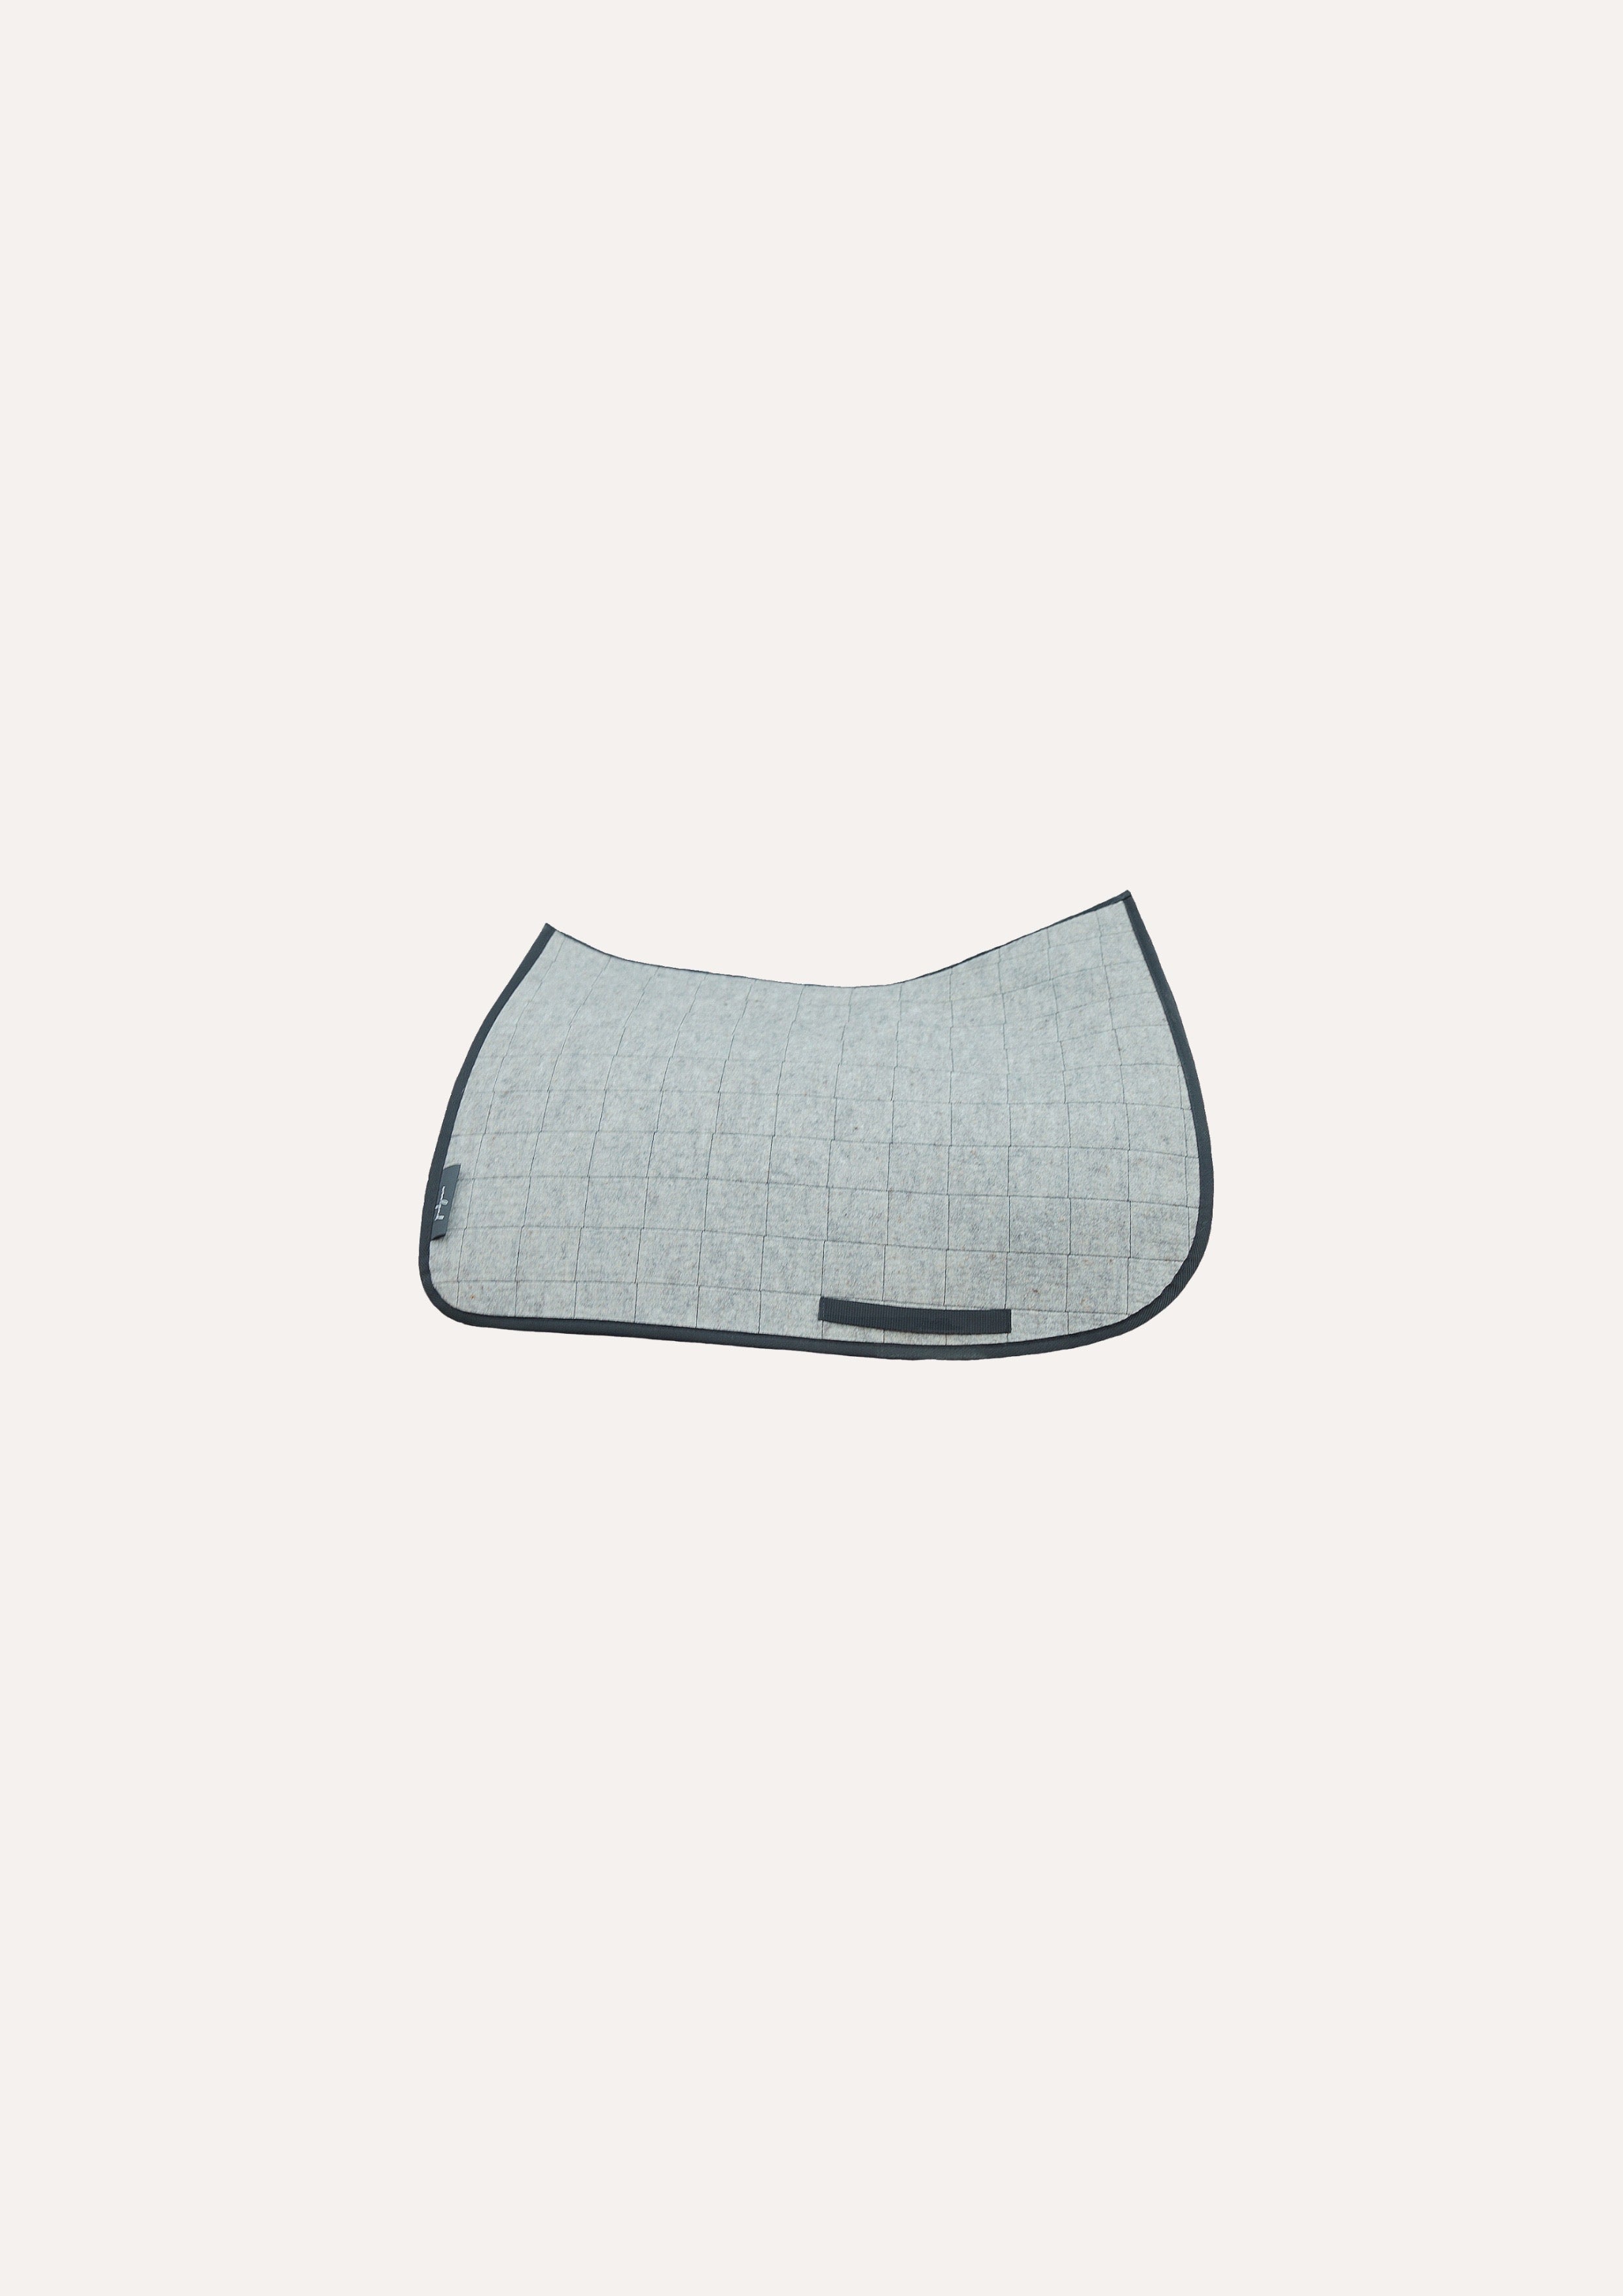 Saddle pad - Available for pre-order, delivery in January. - Woolherd